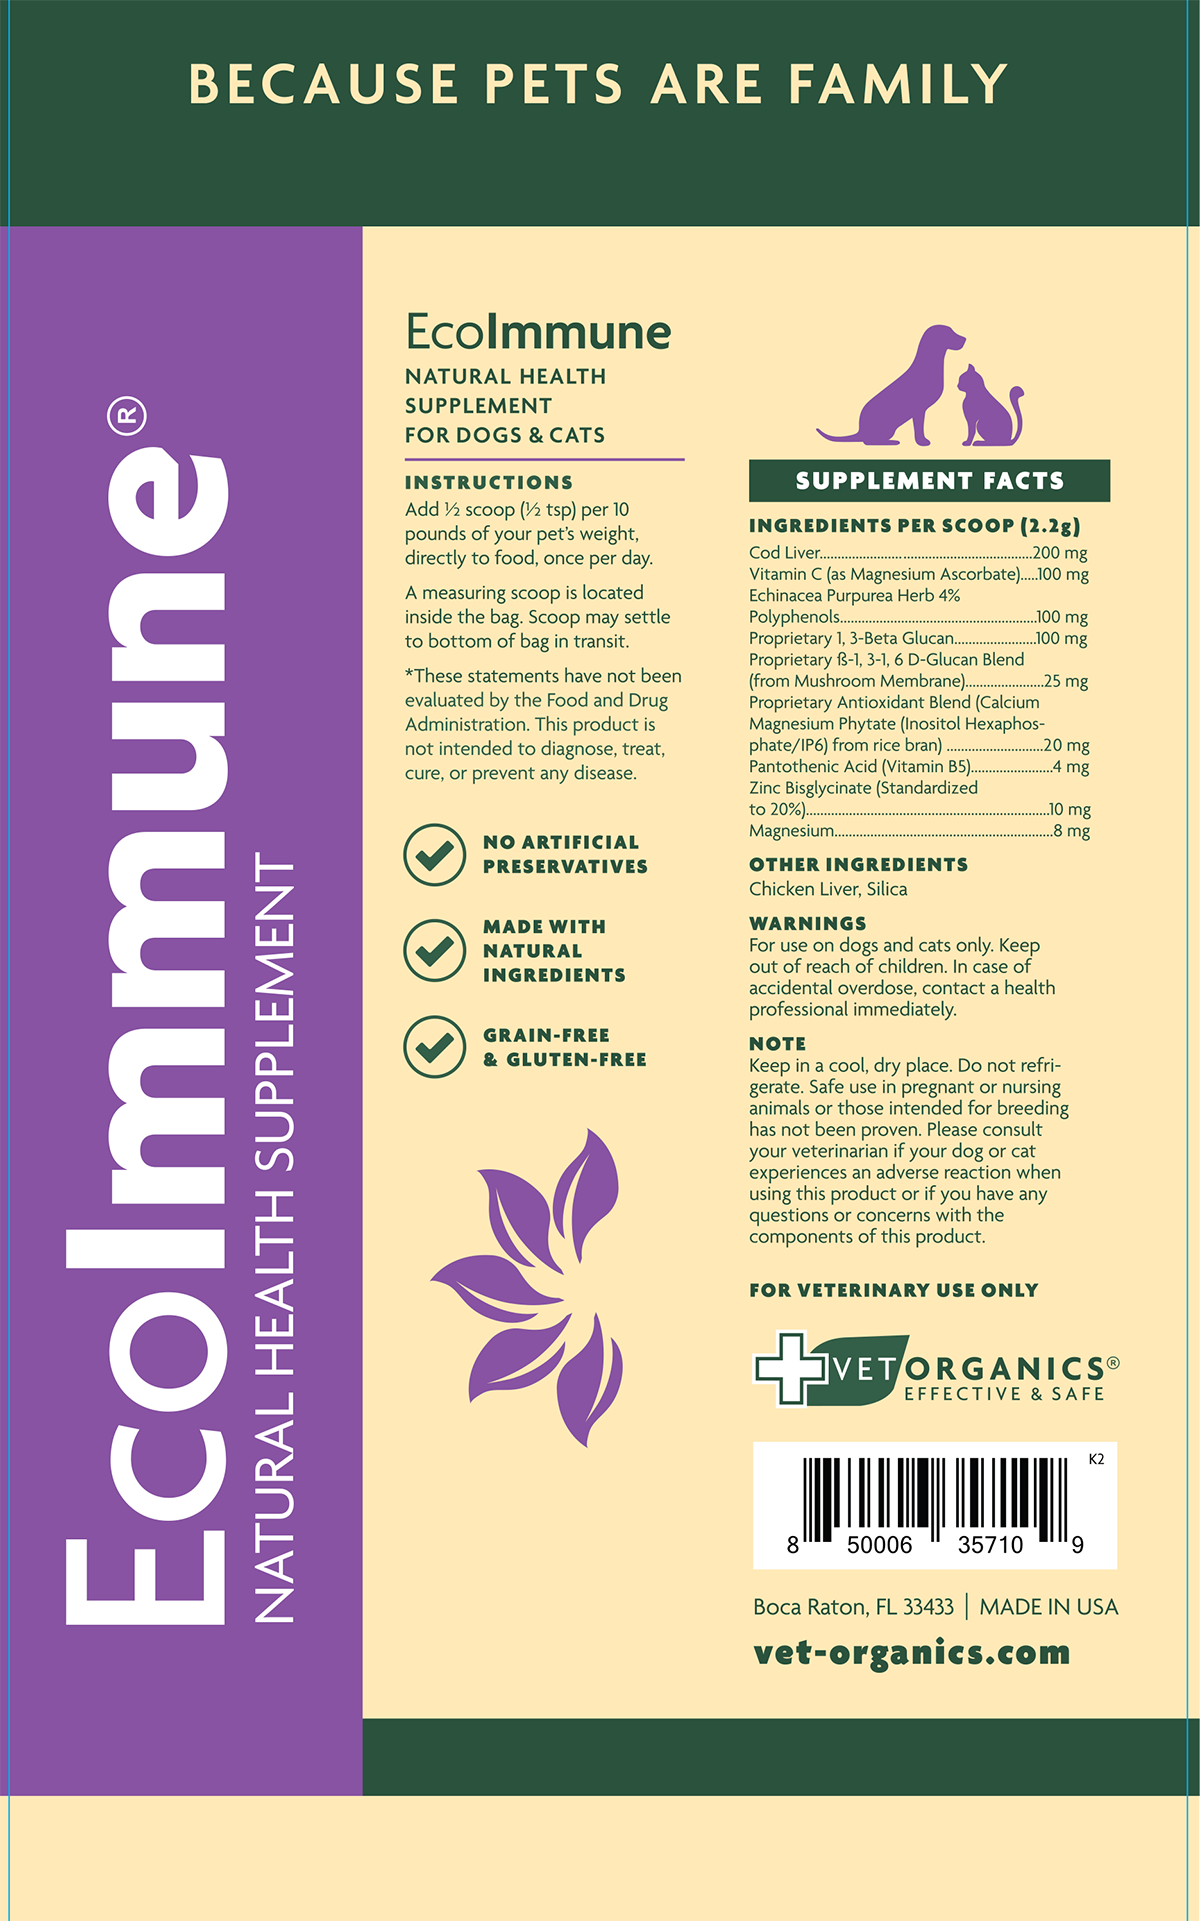 EcoImmune Immune Support & Booster Supplement for Dogs & Cats, 4-oz bag